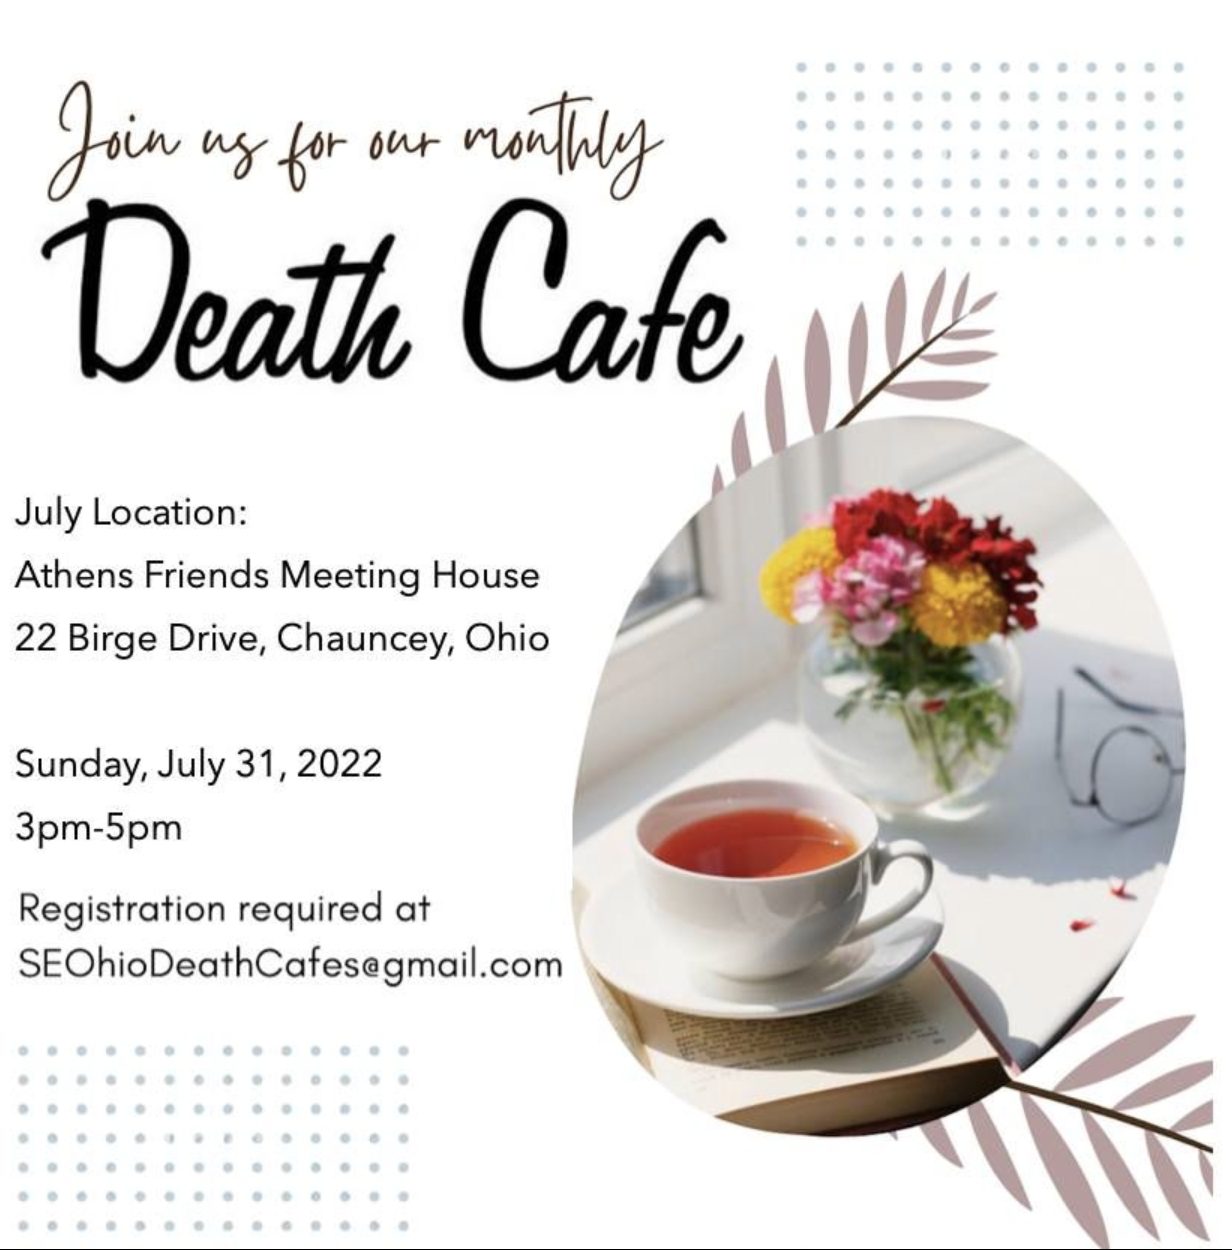 Flyer for the monthly Death Cafe meeting organized by the The Southeast Ohio Natural Burial Working Group. A picture of a cup of tea next to a vase of flowers casts shadows in sunlight. Text on the flyer reads: Join us for our monthly Death cafe. July location: Athens Friends Meeting House 22 Birge Drive, Chauncey, Ohio. Sunday July 31, 2022, 3 p.m. to 5 p.m. SEOhioDeathCafes@gmail.com